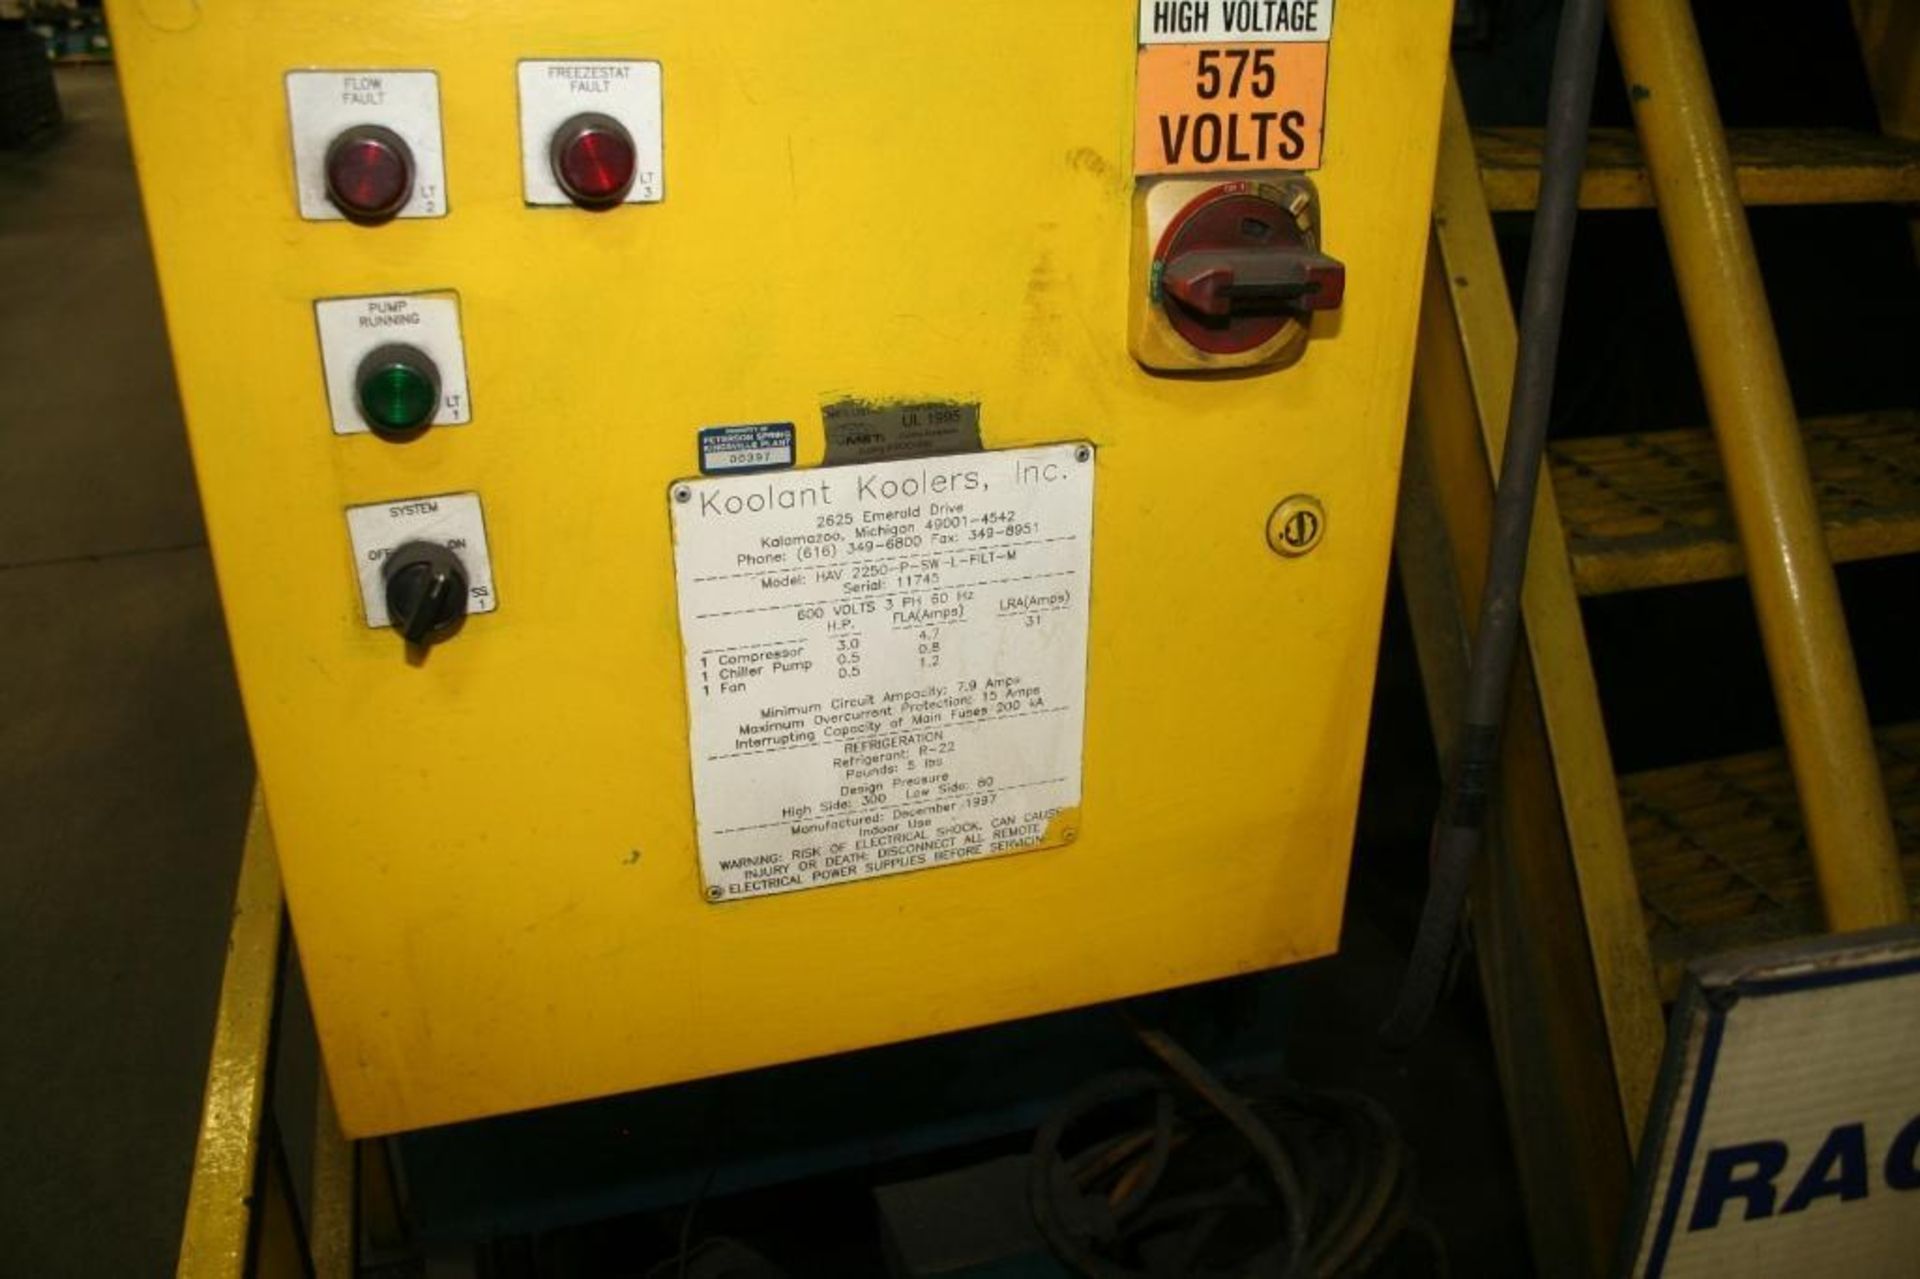 Pyromaitre Turbo Rotary Oven Model TD 60-IG, Pyro Oven, Serial# 980103, 4 Lane, Located at 208 Wigle - Image 6 of 10